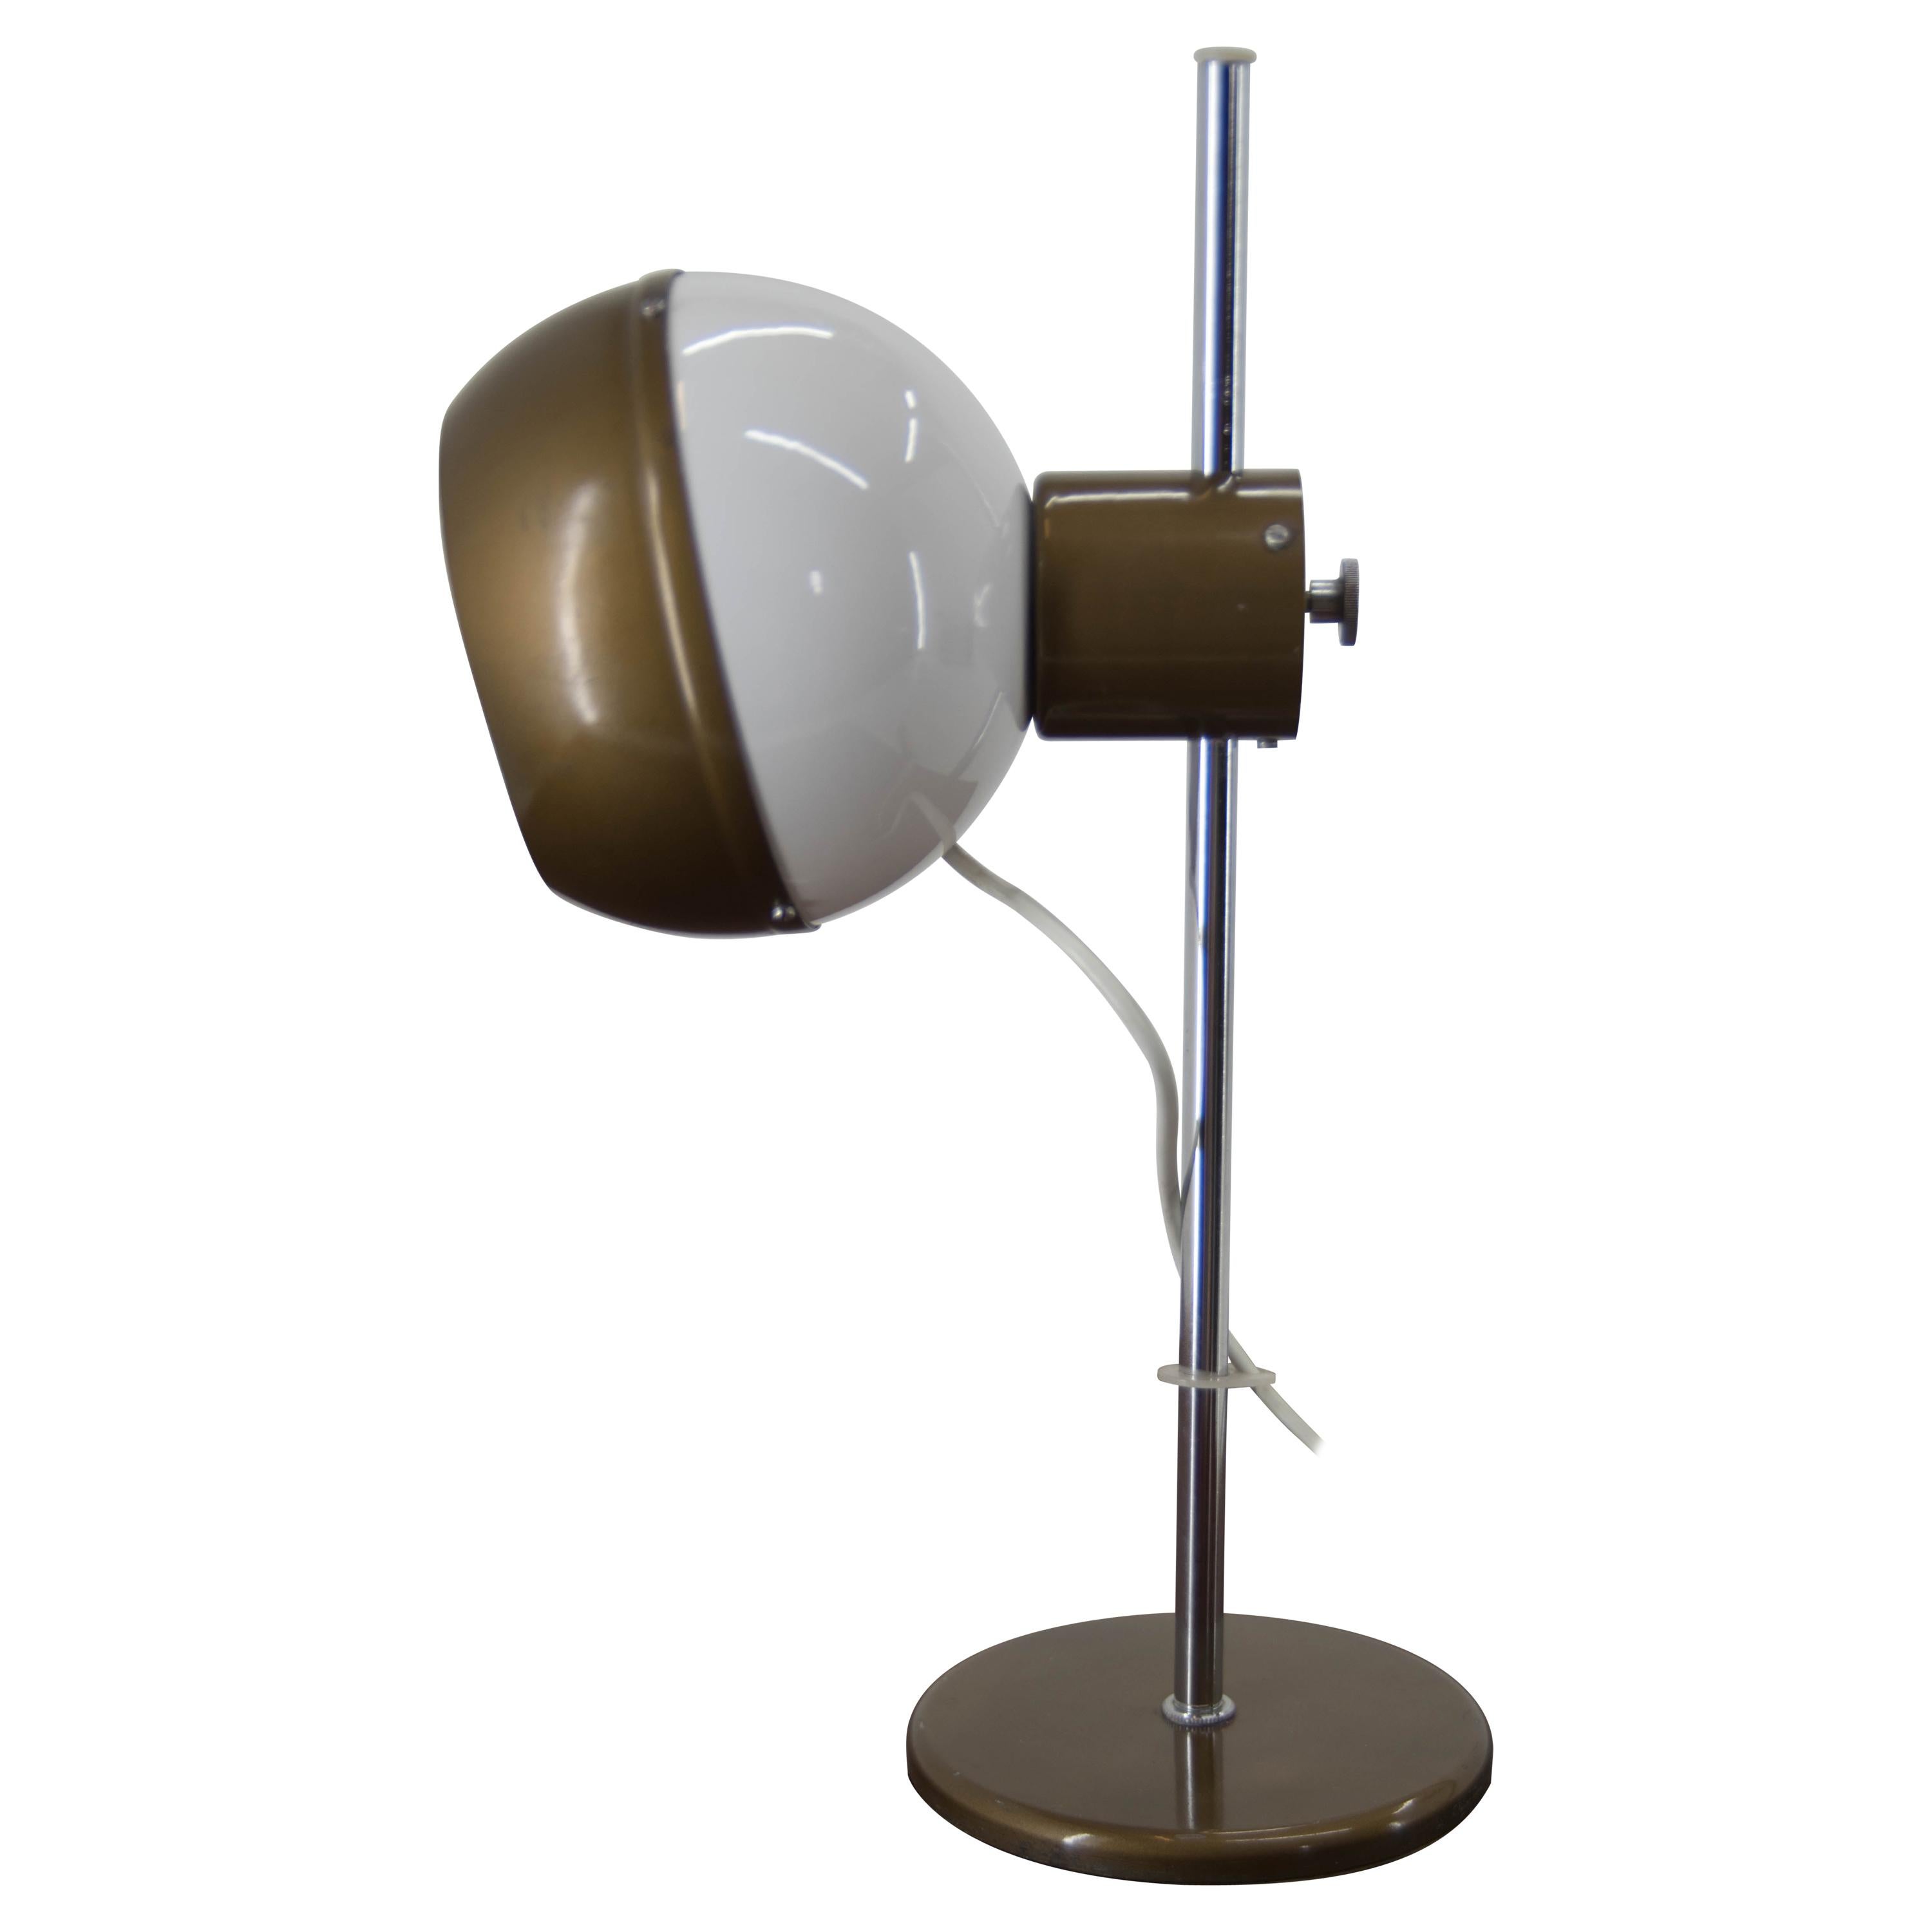 Adjustable Magnetic Table Lamp by Drukov, 1970s, Two Items Available For Sale